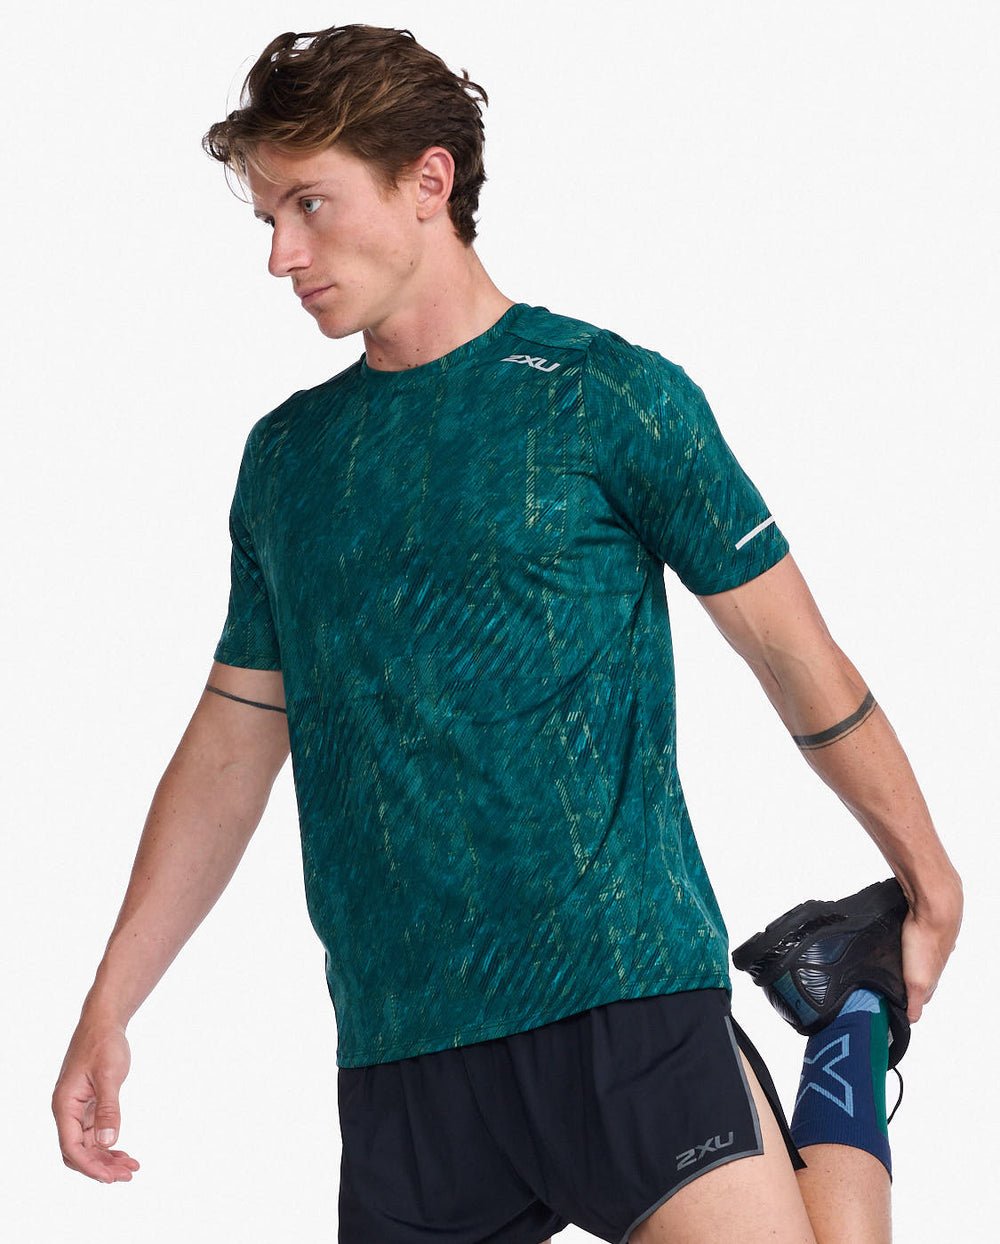 2XU South Africa - Mens Light Speed Tee - Glitch Check/Silver Reflective